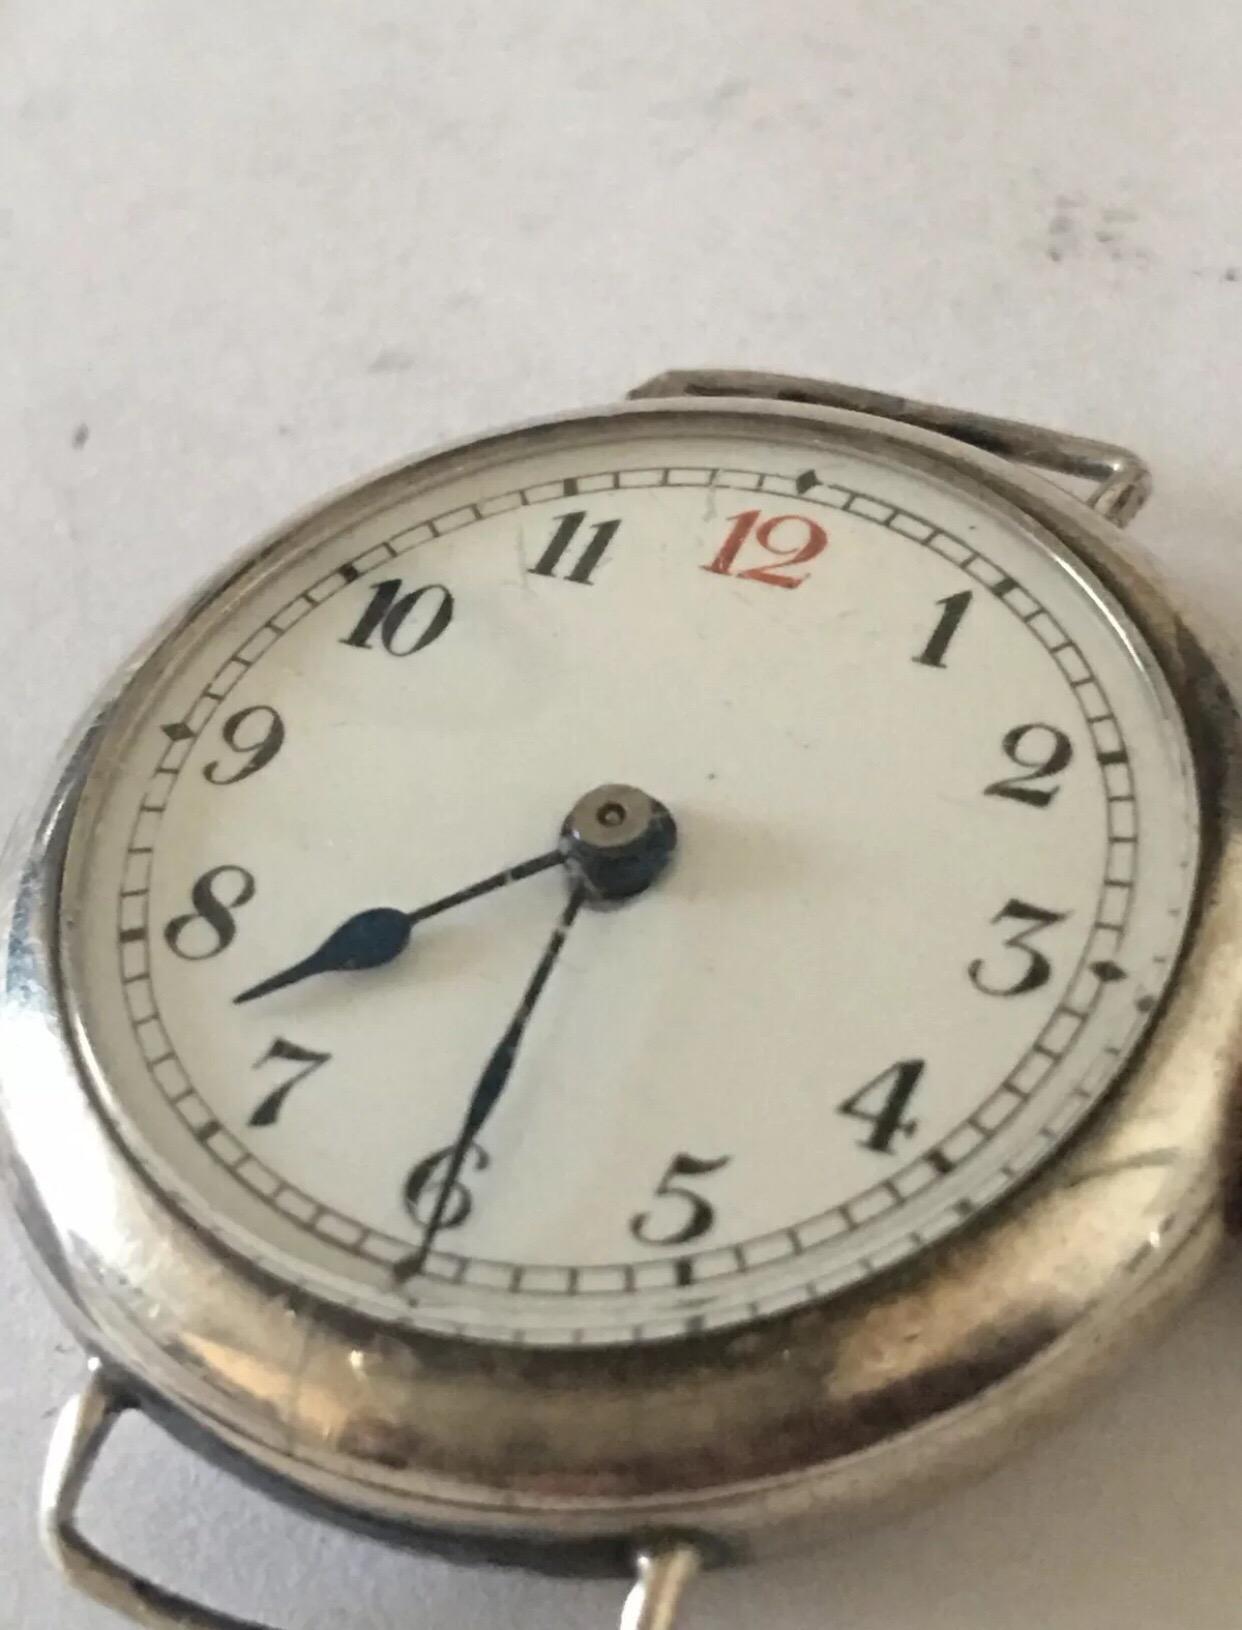 
Antique Silver Small Trench Watch.

This beautiful tiny trench watch is working and ticking well. It needs a nice strap to be able to wear it